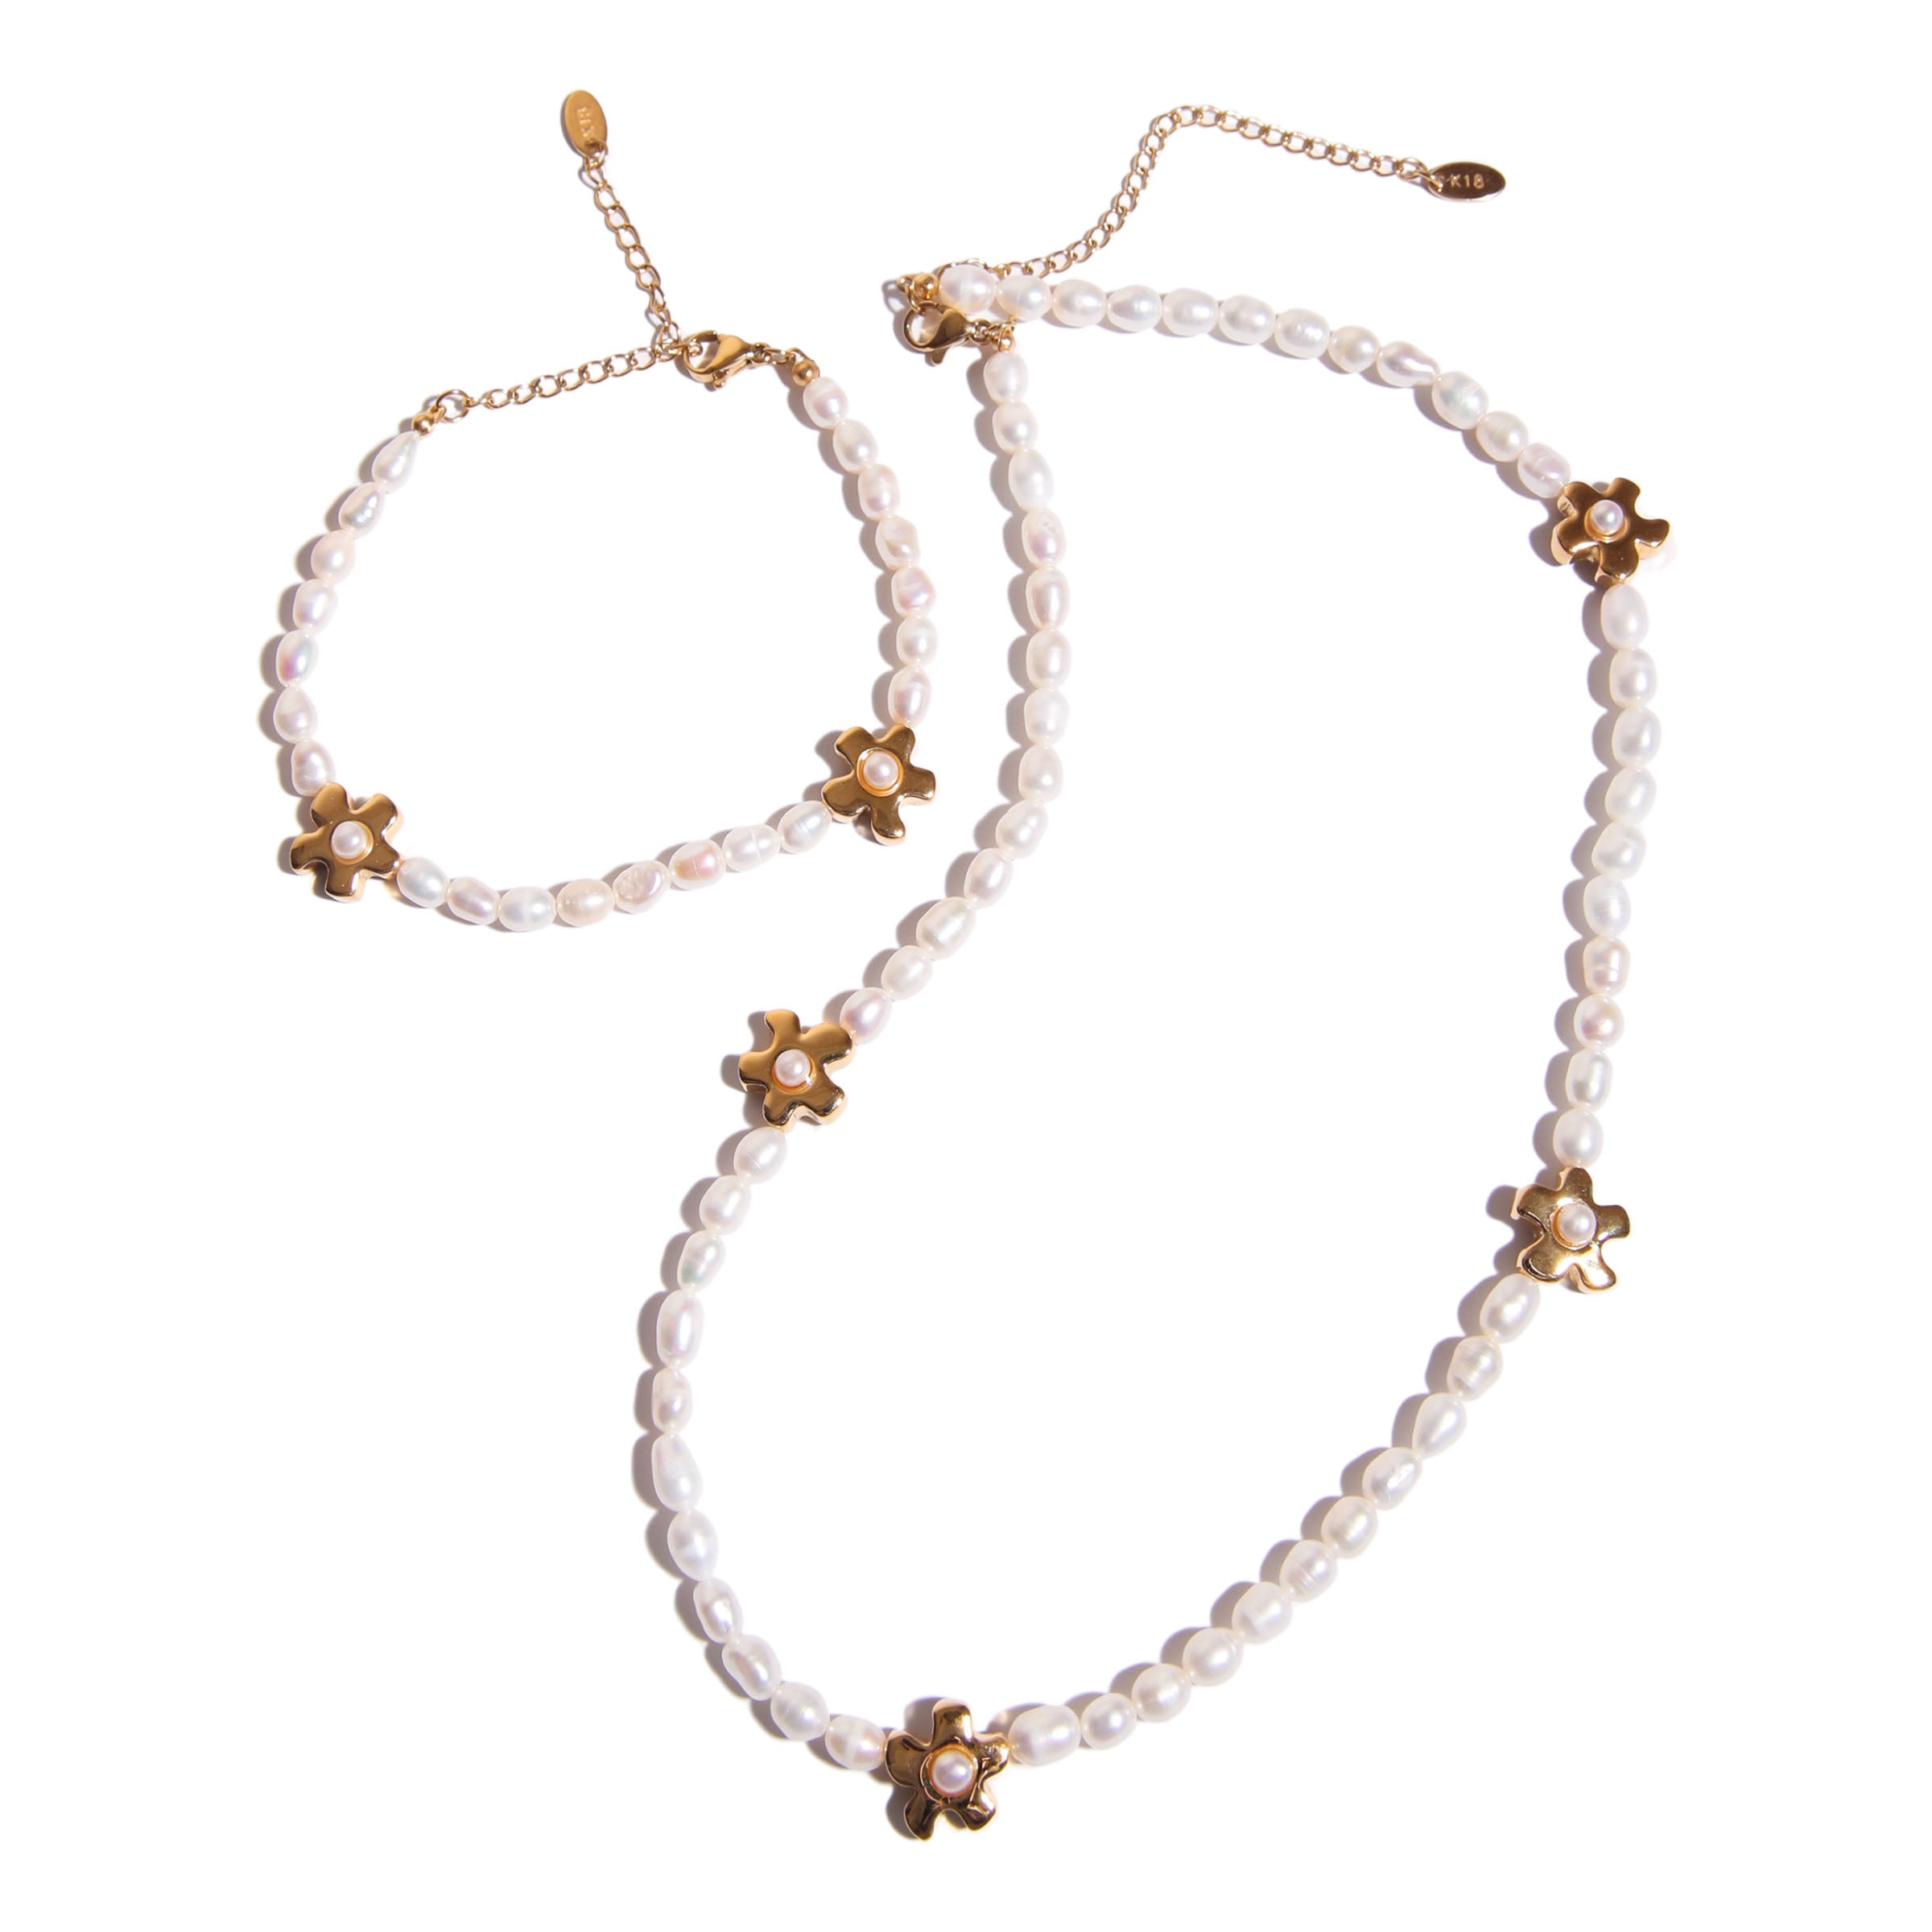 Aesthetic Flower Gold and Fresh Water Pearl Necklace and Bracelet Set